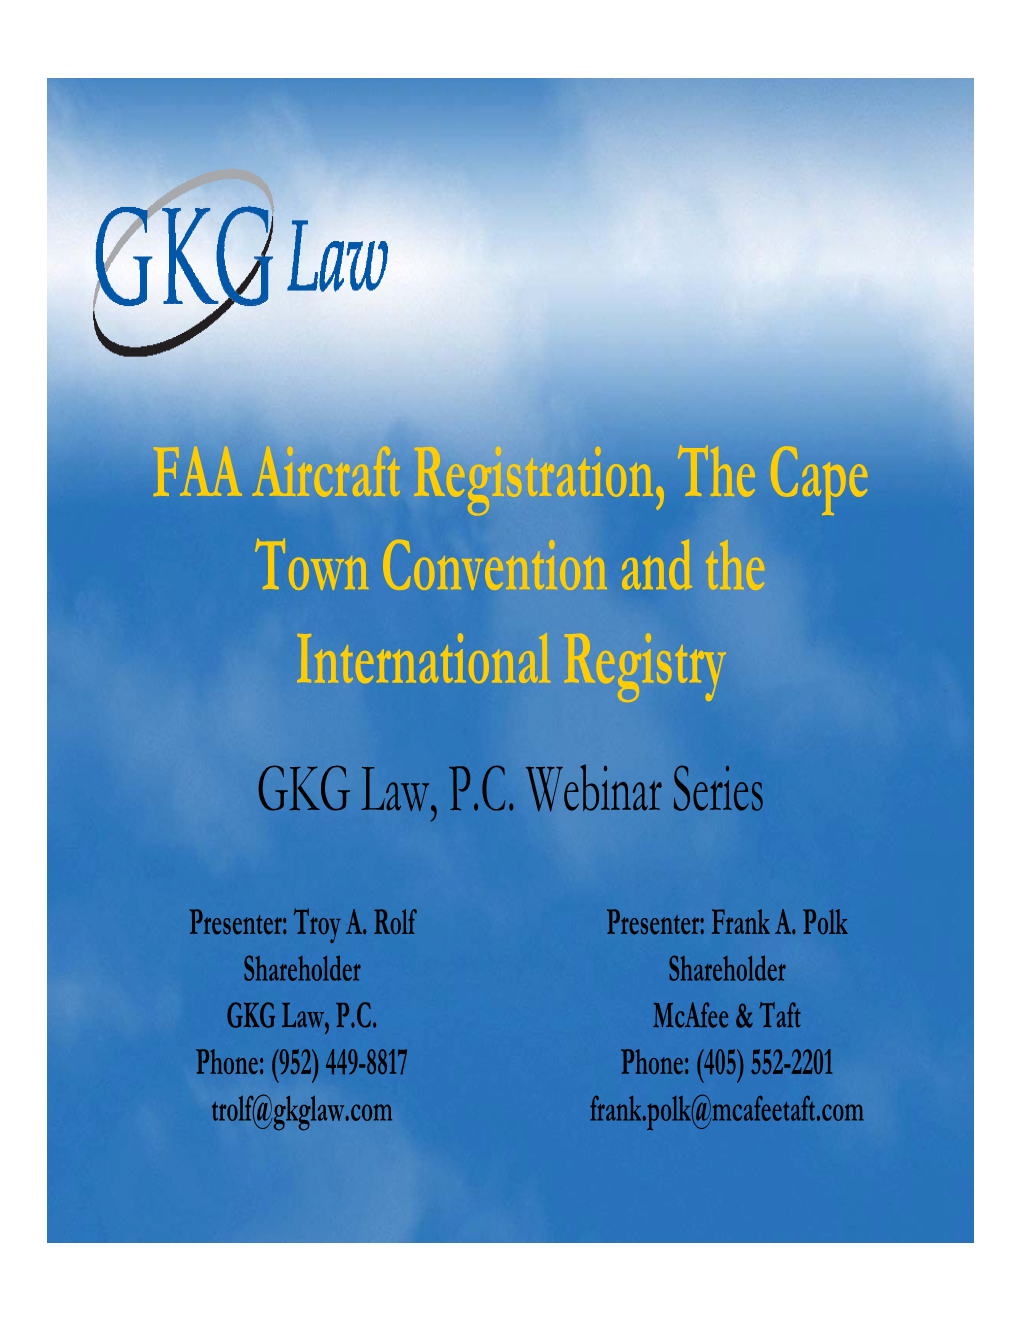 FAA Aircraft Registration, the Cape Town Convention and the International Registry GKG Law, P.C